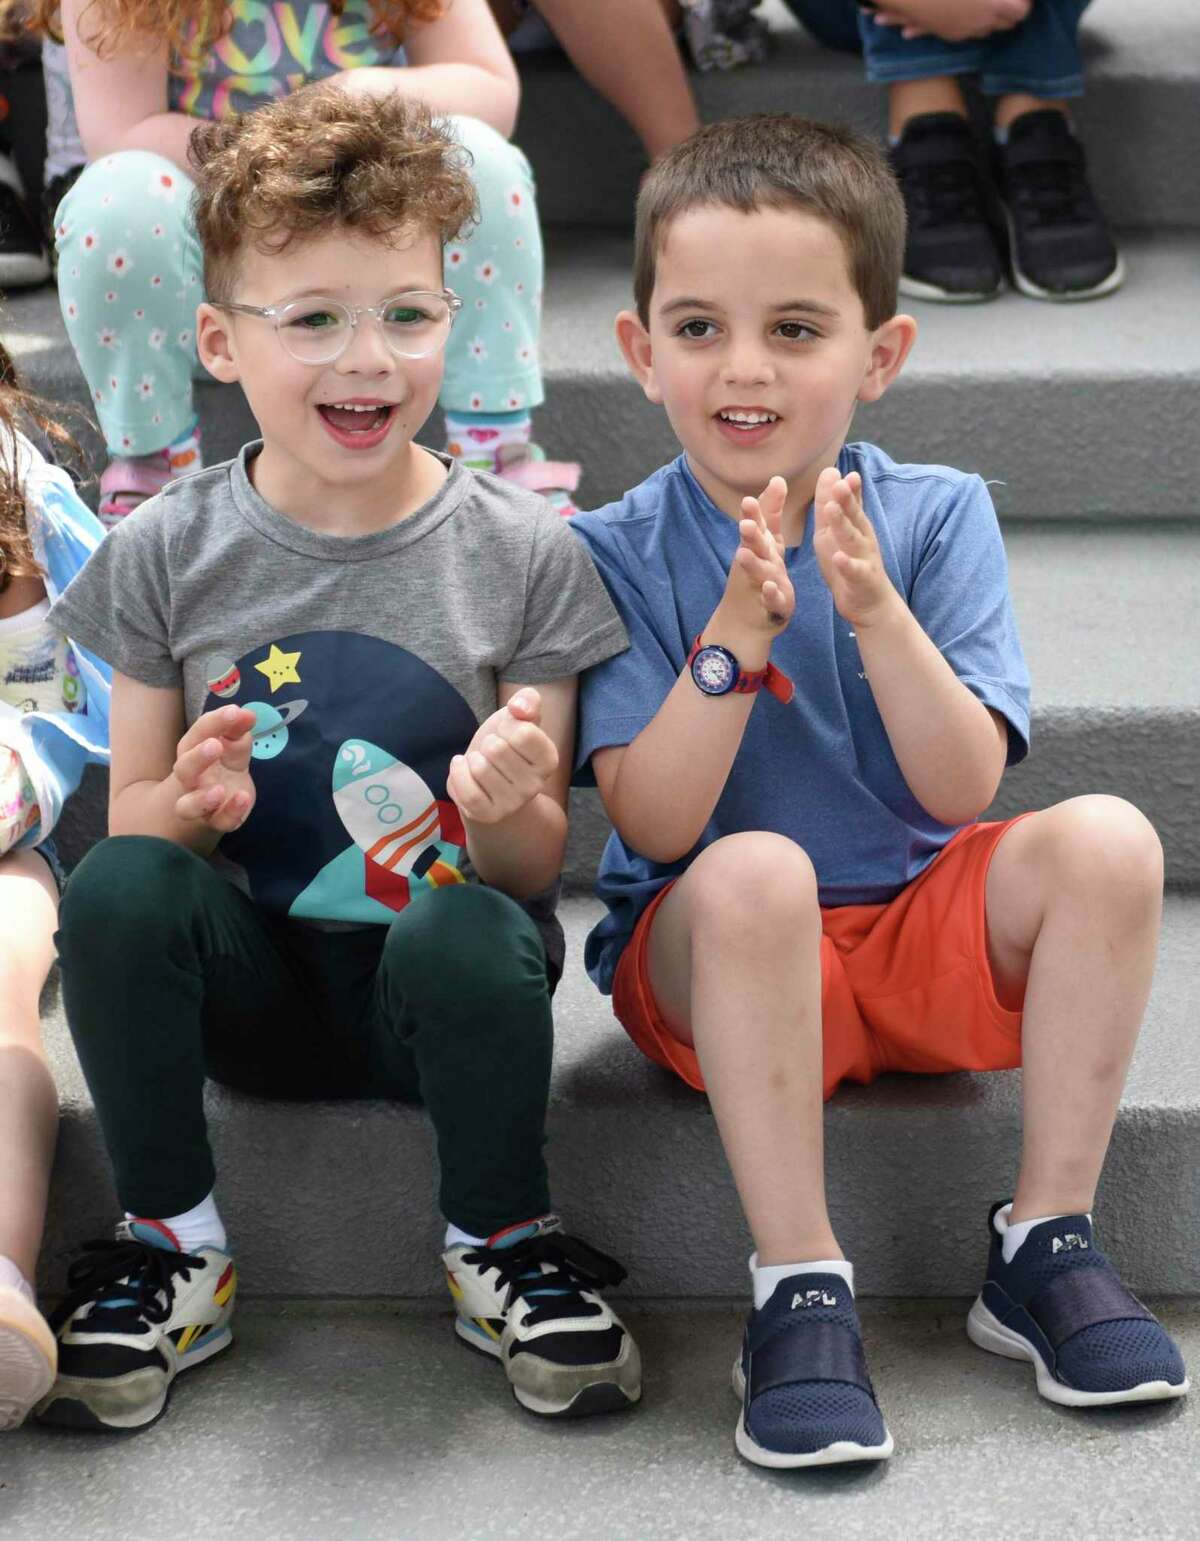 Selma Maisel Nursery School students Miles Tulchin, left, and Hunter Weiss clap during the Starfish Connection backpack donation event at Temple Sholom in Greenwich, Conn. Thursday, May 26, 2022. 10 backpacks filled with essential materials were collected for the Stamford-based nonprofit Starfish Connection to be given to underserved students in grades five through 10 for an upcoming trip to High Rock Camp in the Berkshires. Starfish Connection is an all-volunteer organization that seeks to close Stamford’s academic achievement gap through mentoring, enrichment programs, and educational support.